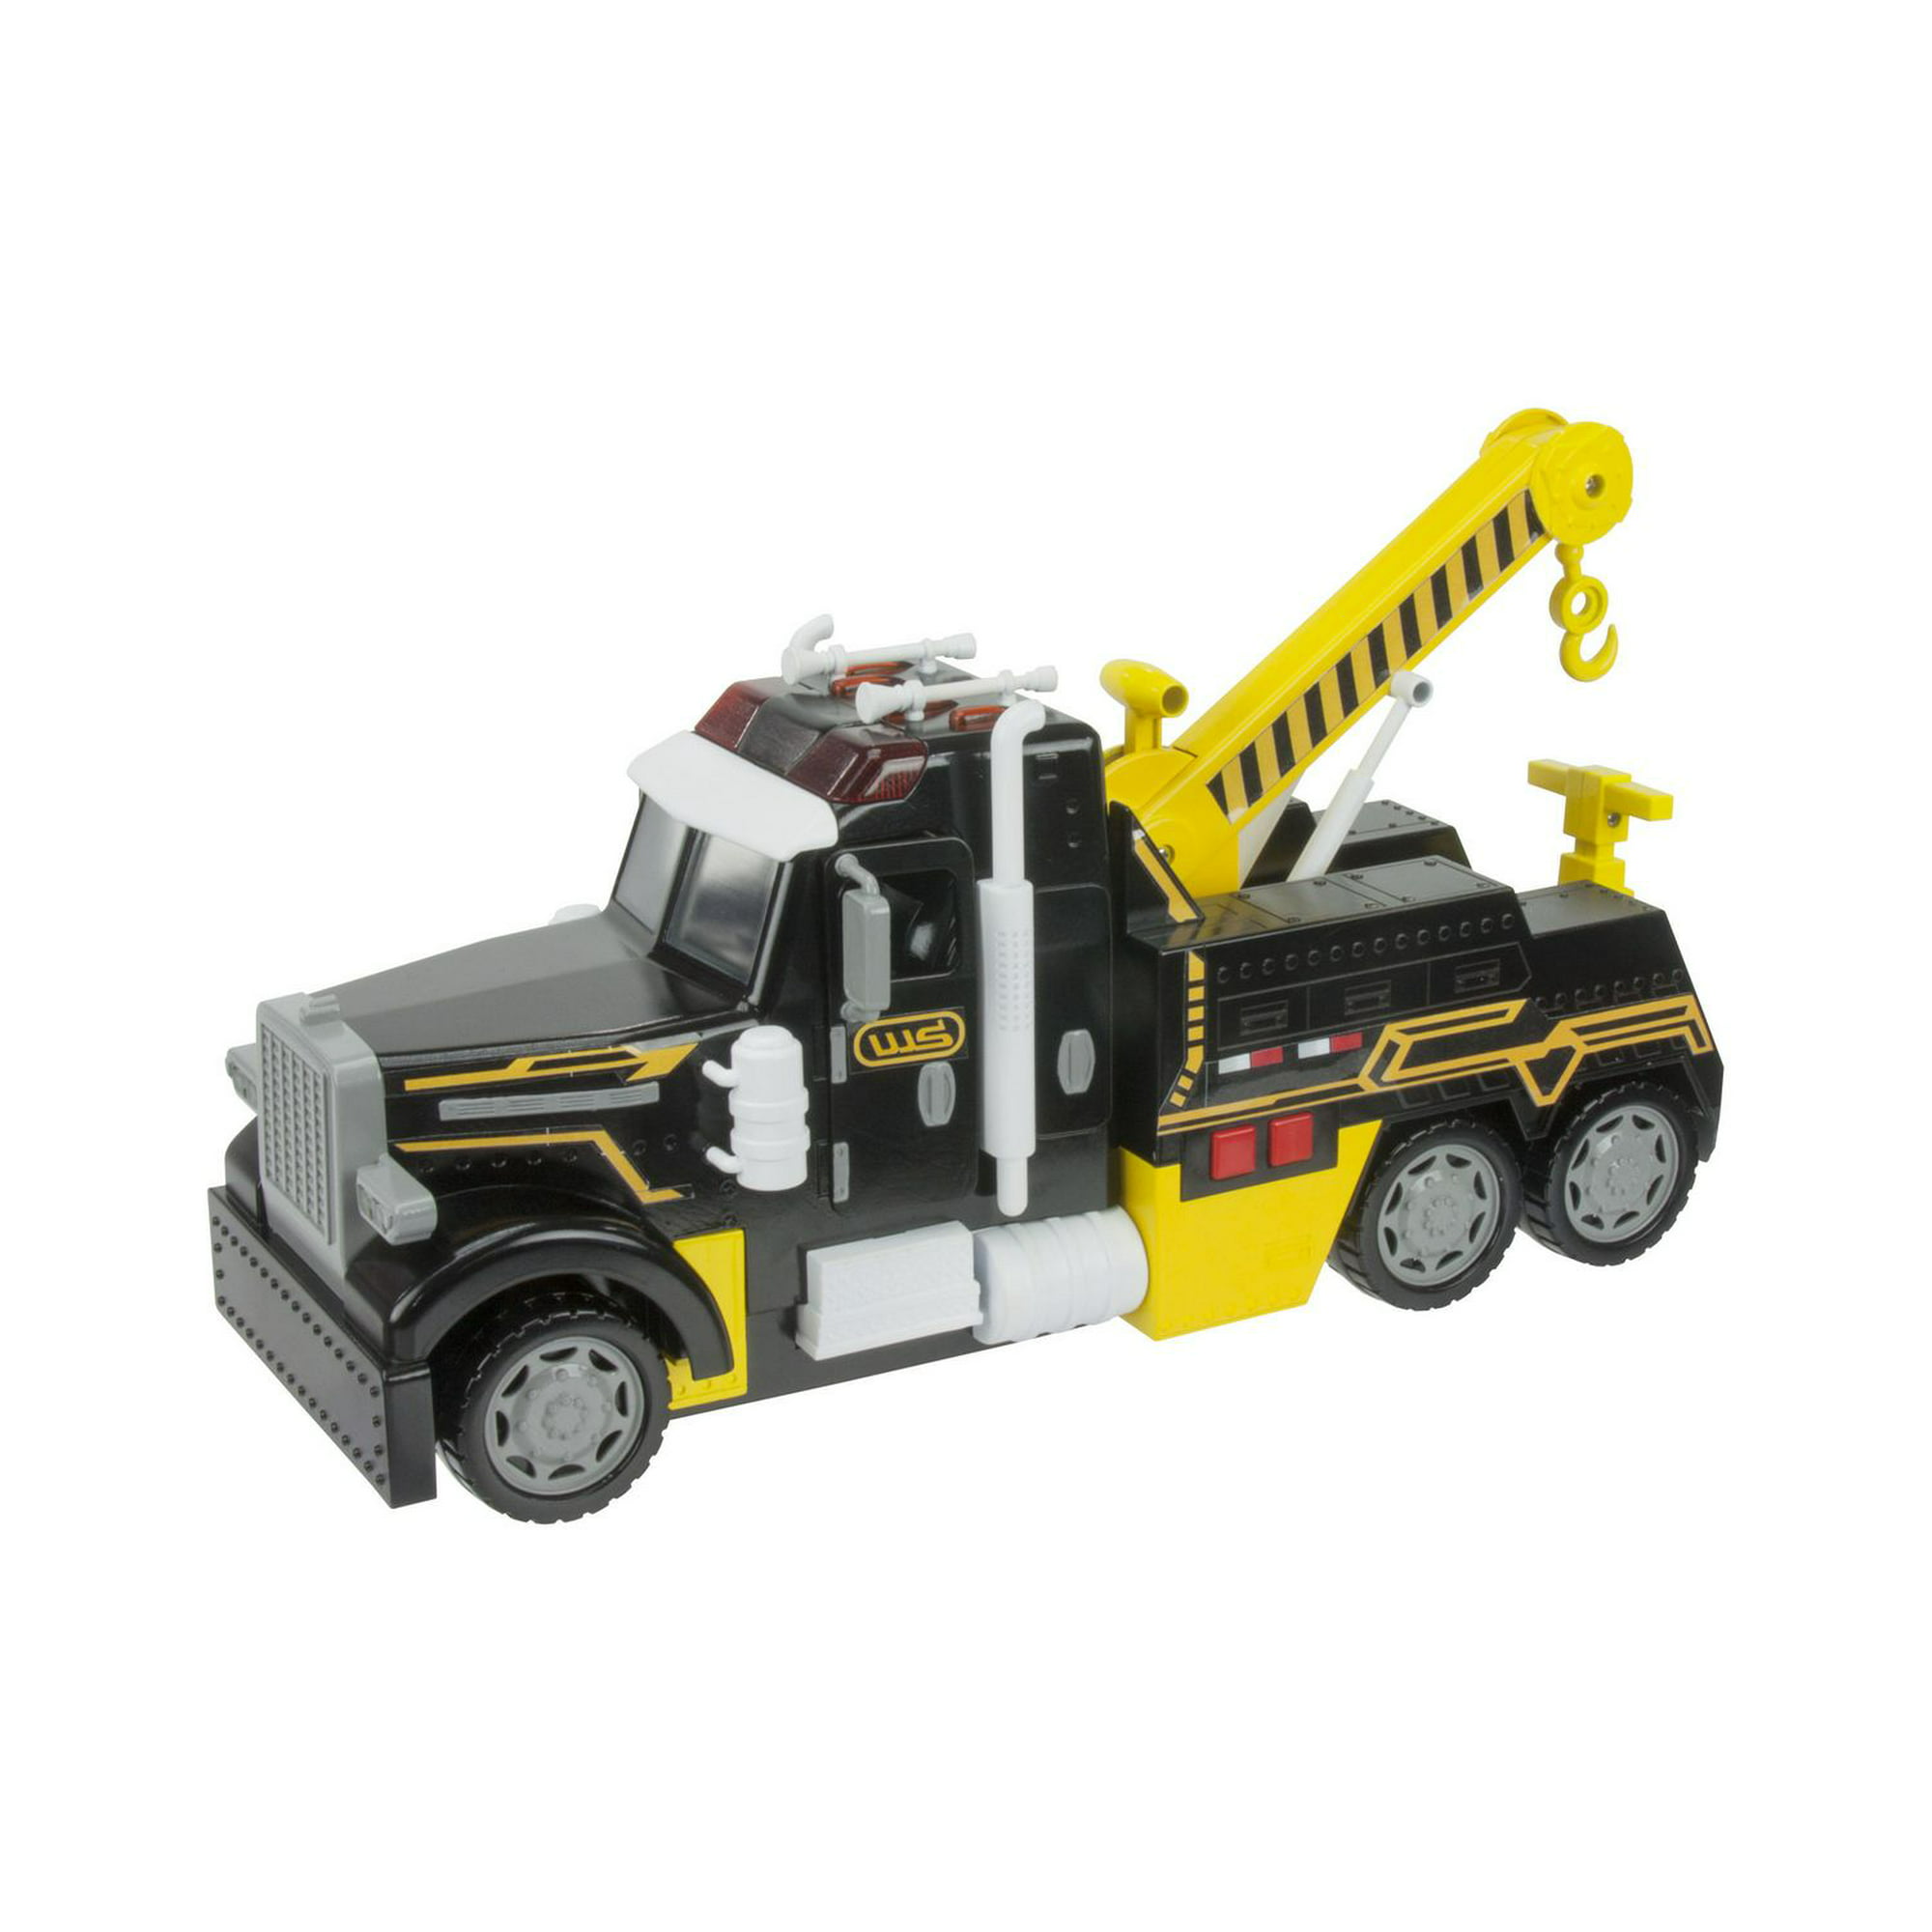 Adventure Force Light & Sound Tow Truck Toy Vehicle 